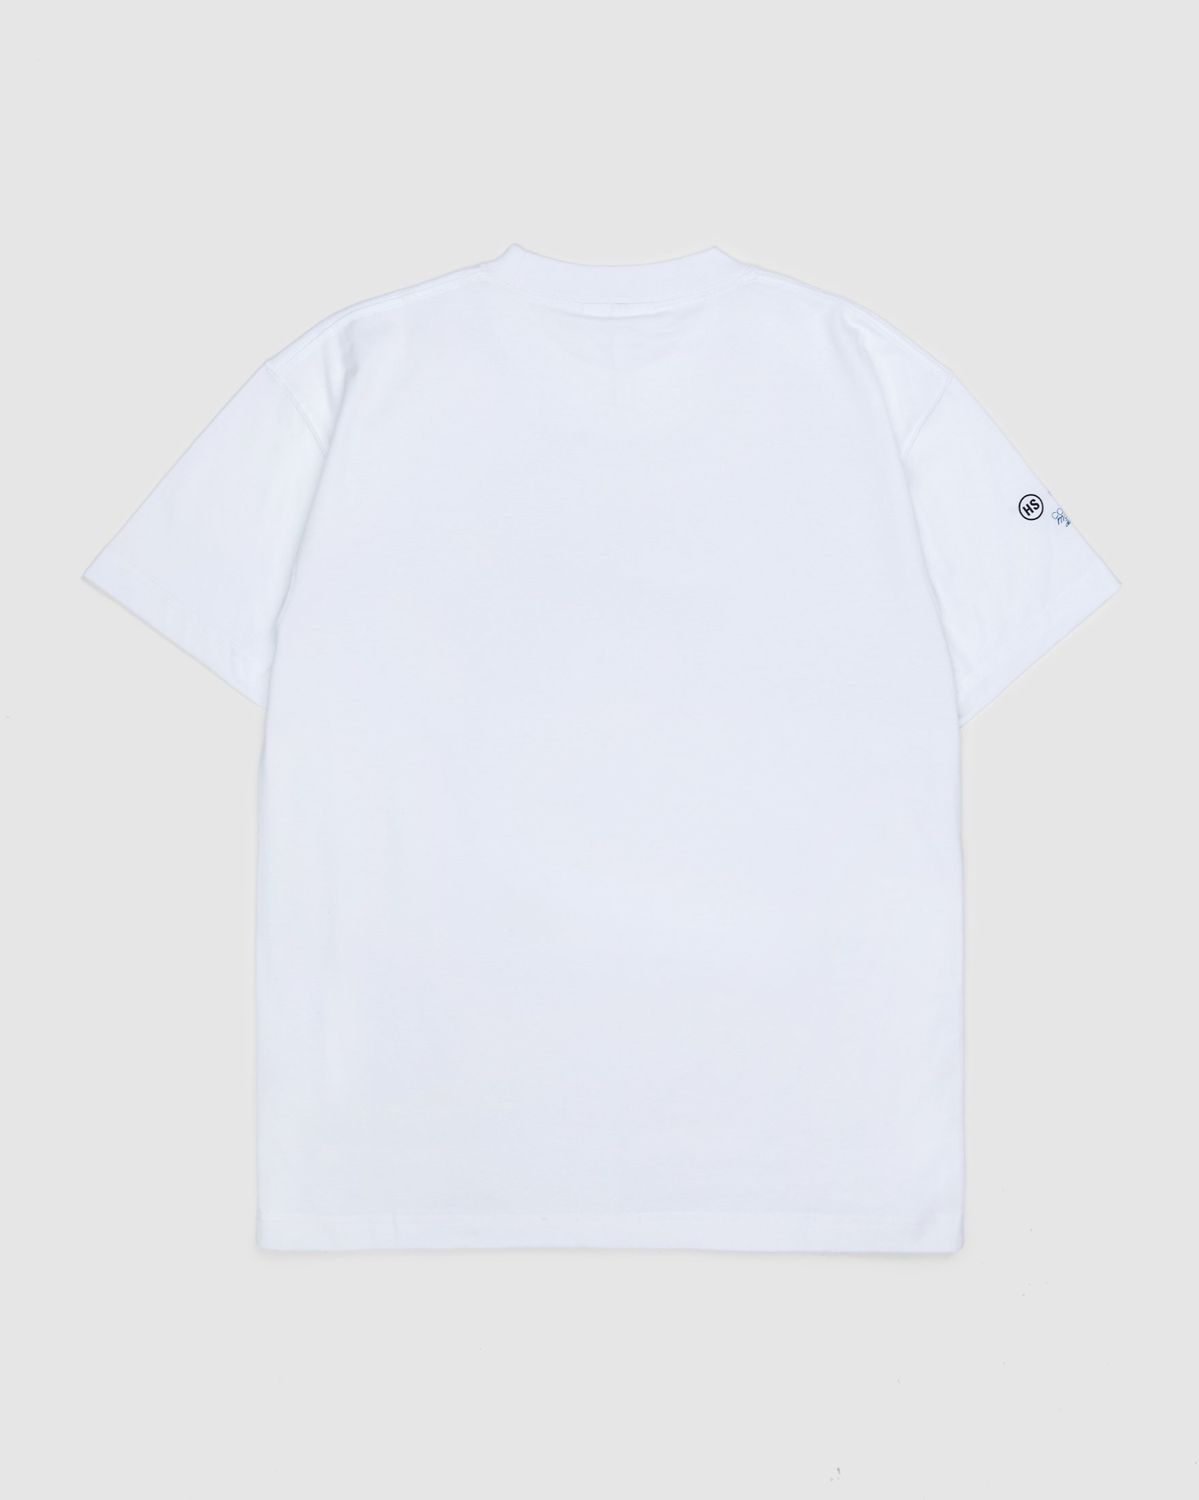 Colette Mon Amour x Soulland – Snoopy Bed White T-Shirt - T-Shirts - White - Image 2